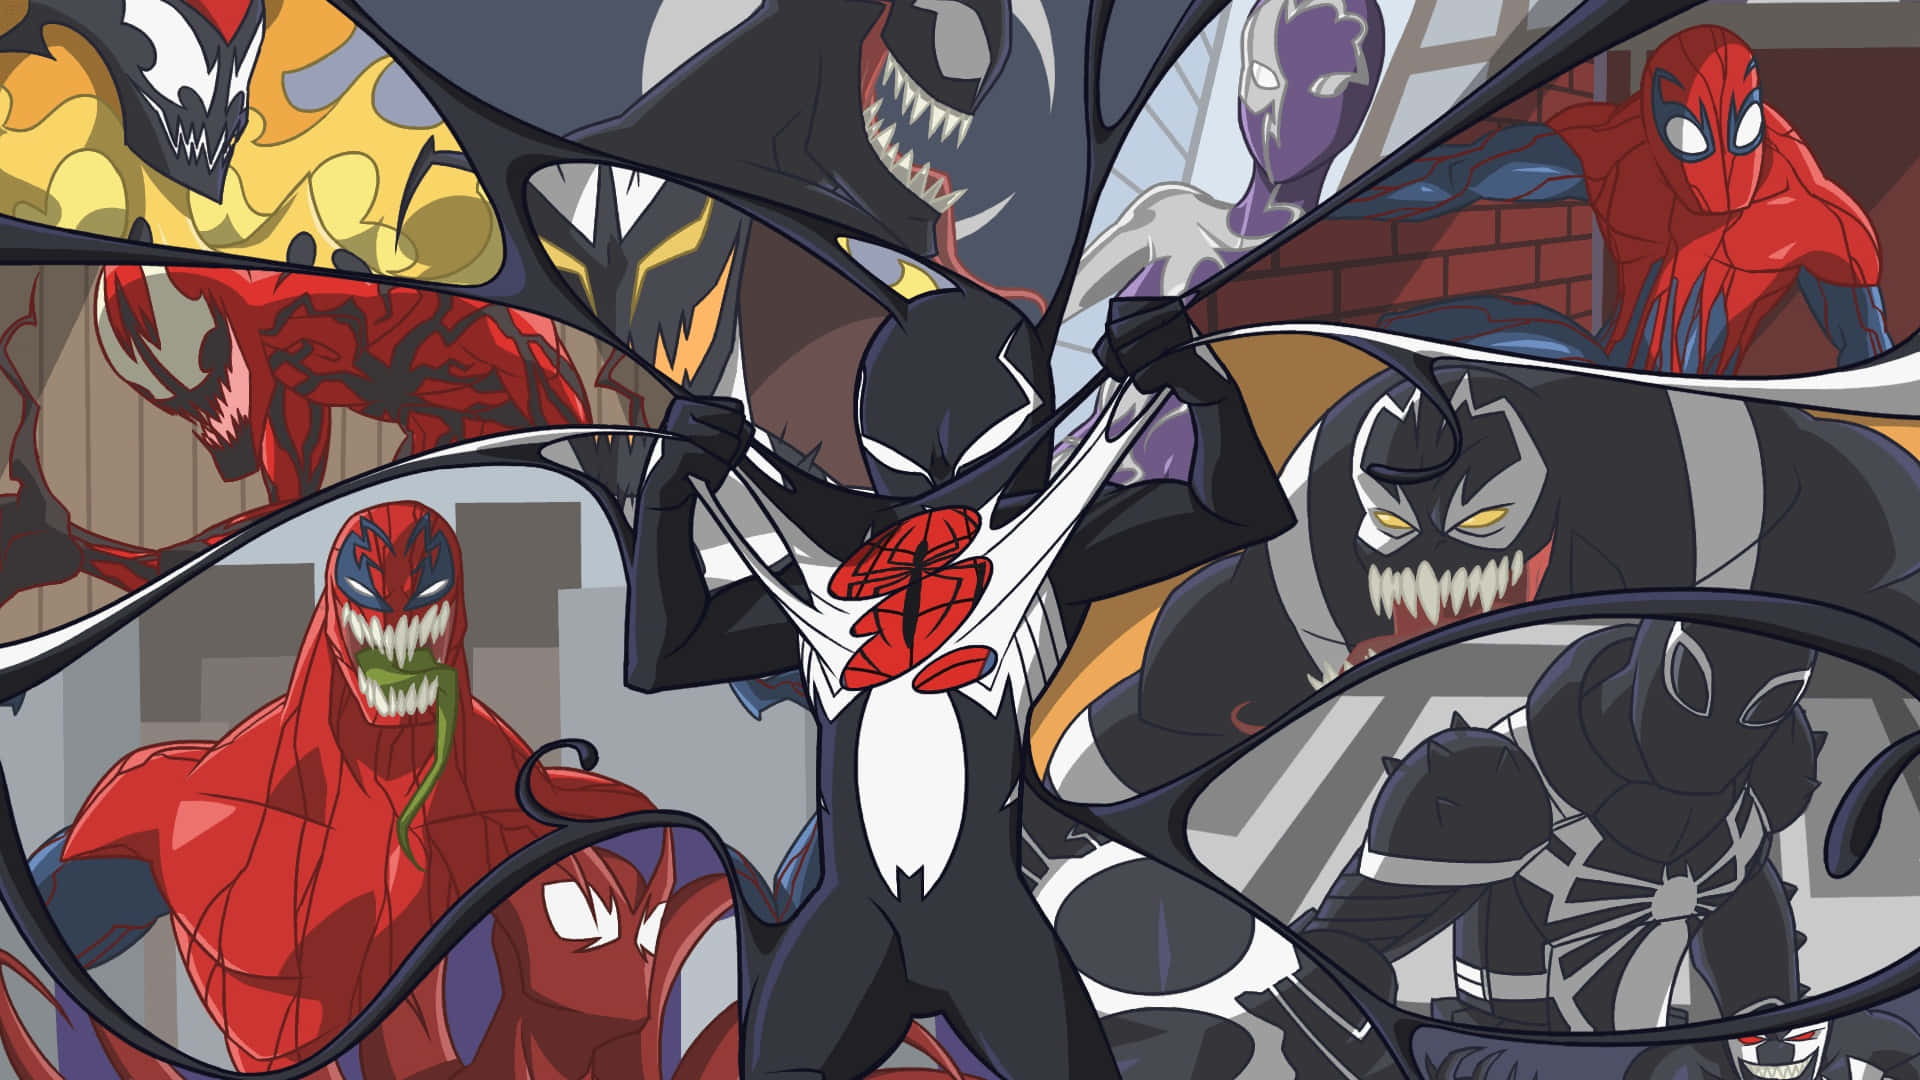 Venom unleashed - an iconic comic book moment Wallpaper